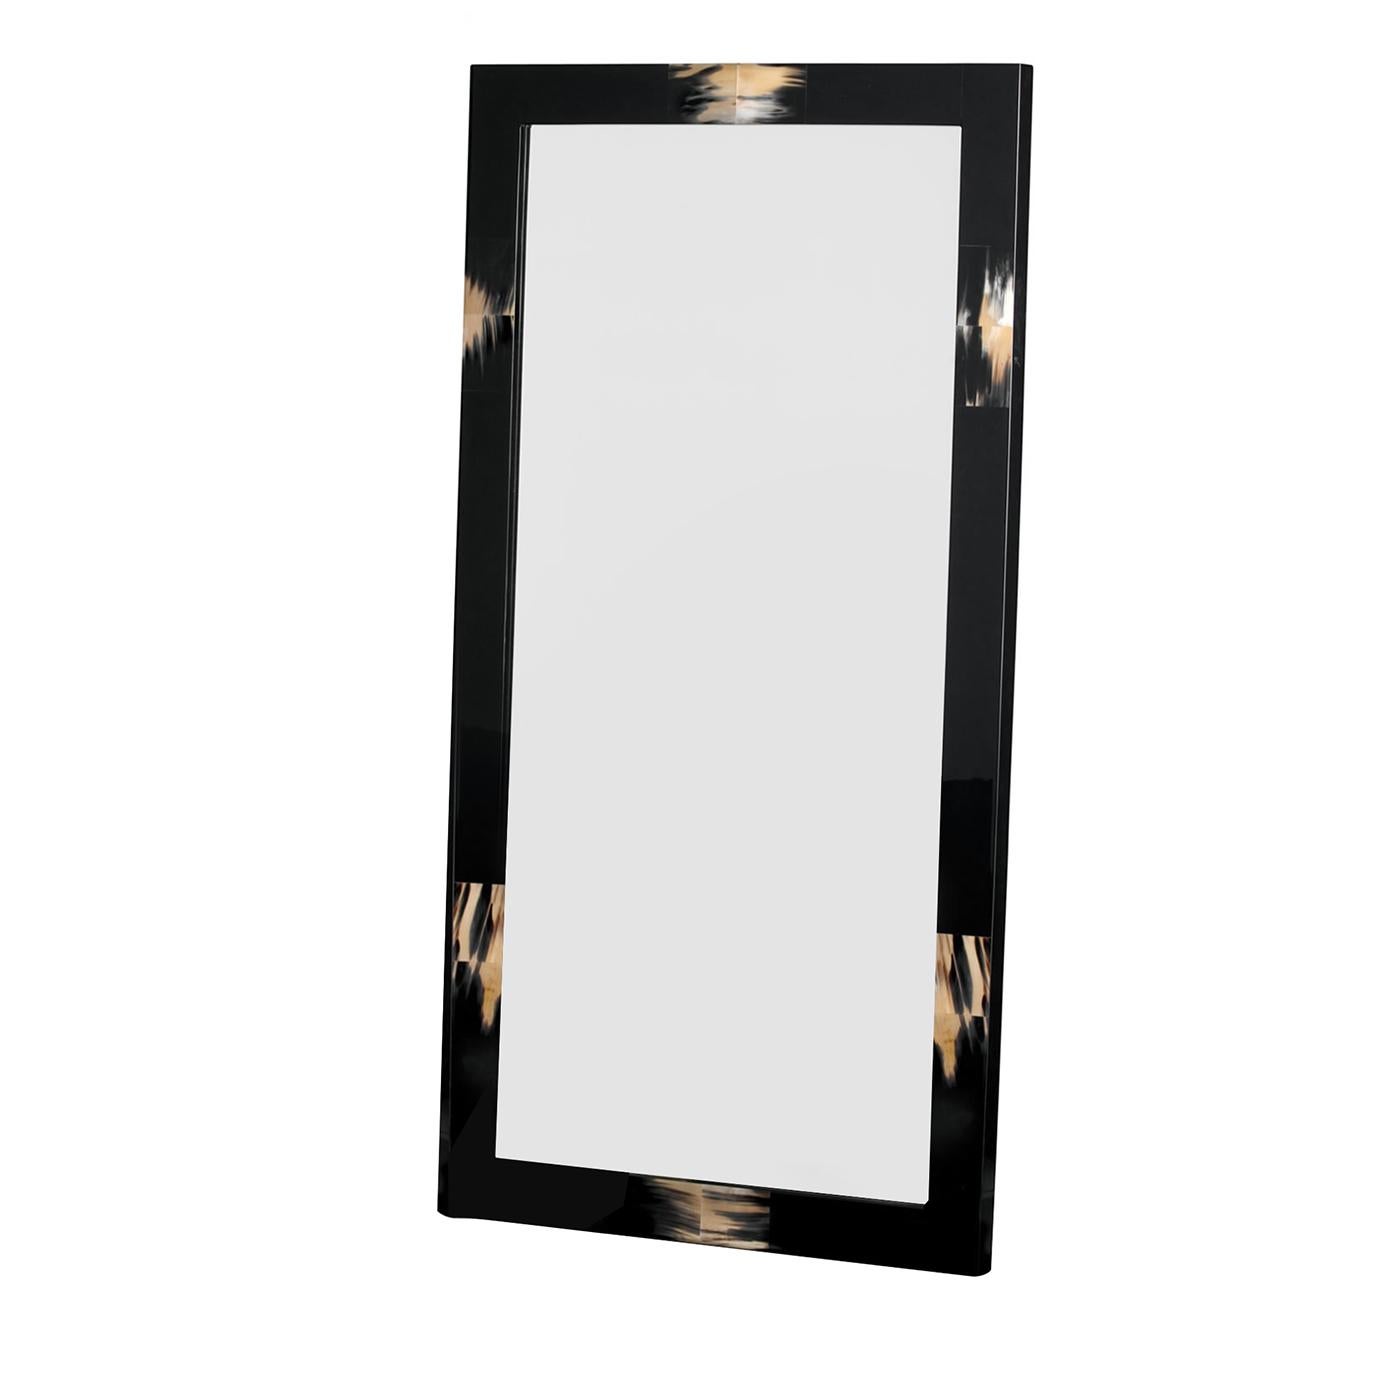 Minimalism meets luxury in this exclusive rectangular wall mirror, piece owing its uniqueness to the presence of precious inlays of authentic dark horn that adorn its bold and clean-lined frame. Fashioned of wood and lacquered in glossy black for a